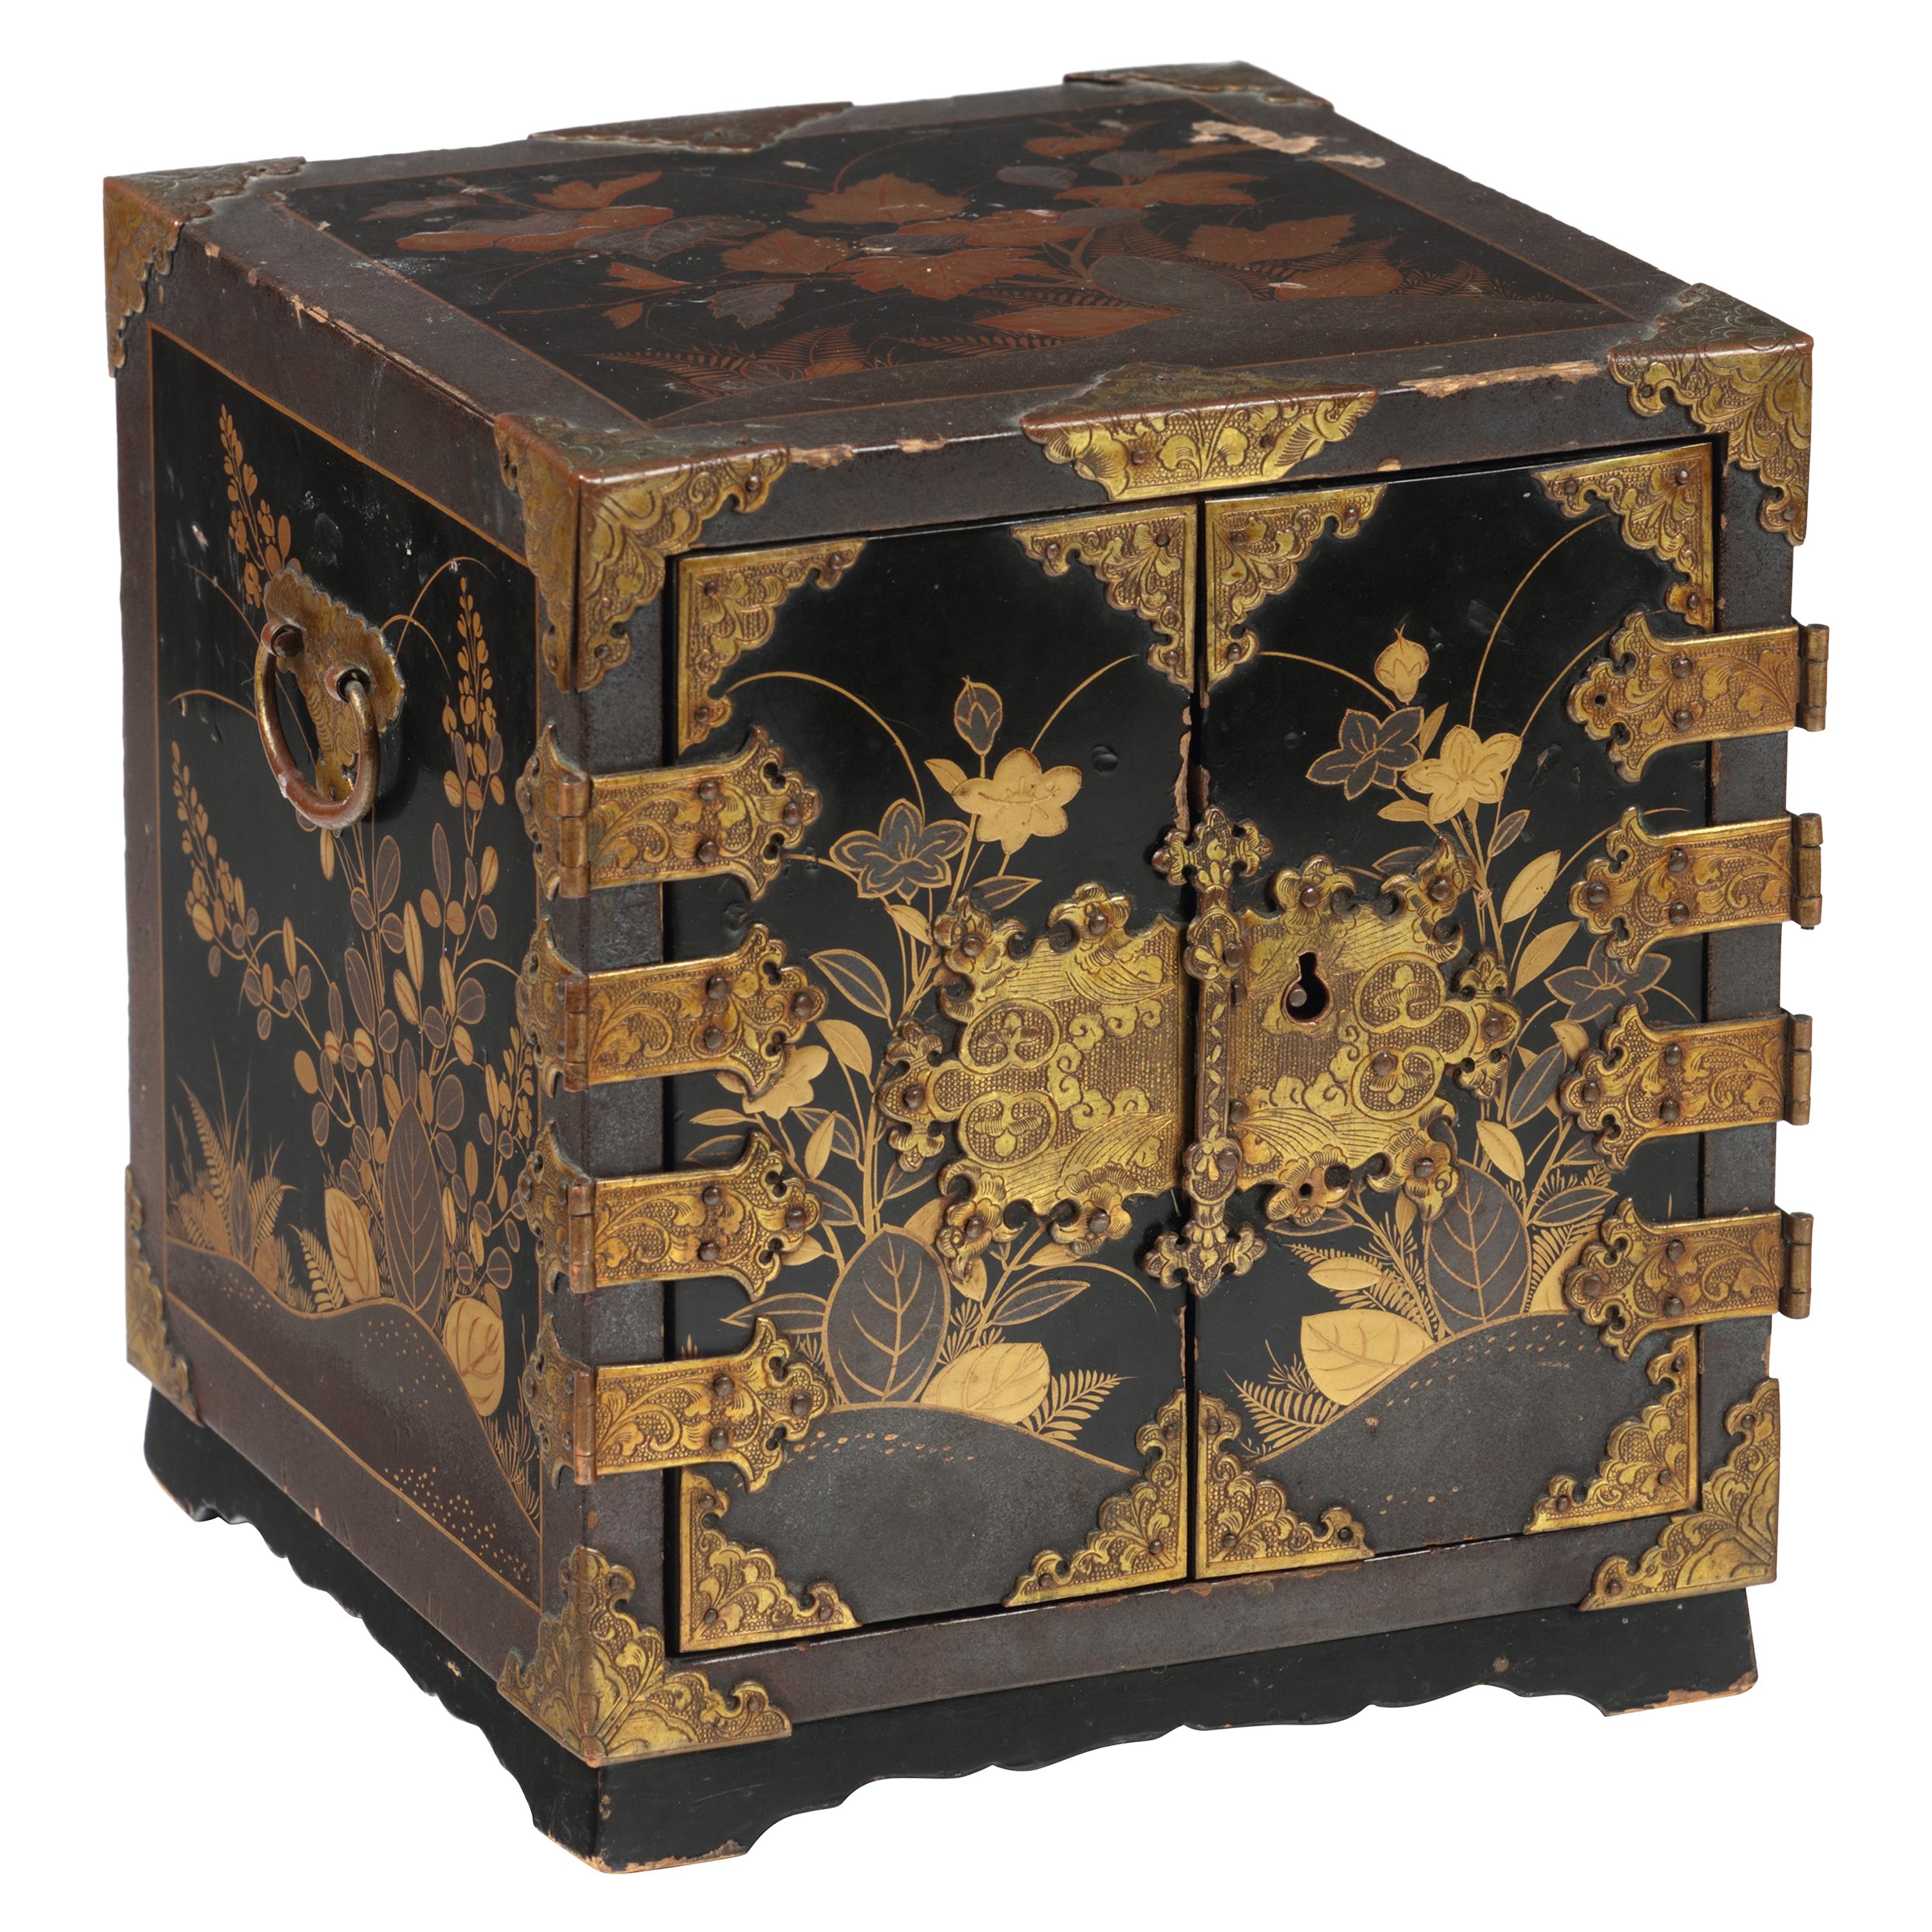 Miniature 17th Century Japanese Lacquer Jewelry Cabinet with Gilt-Bronze Mounts